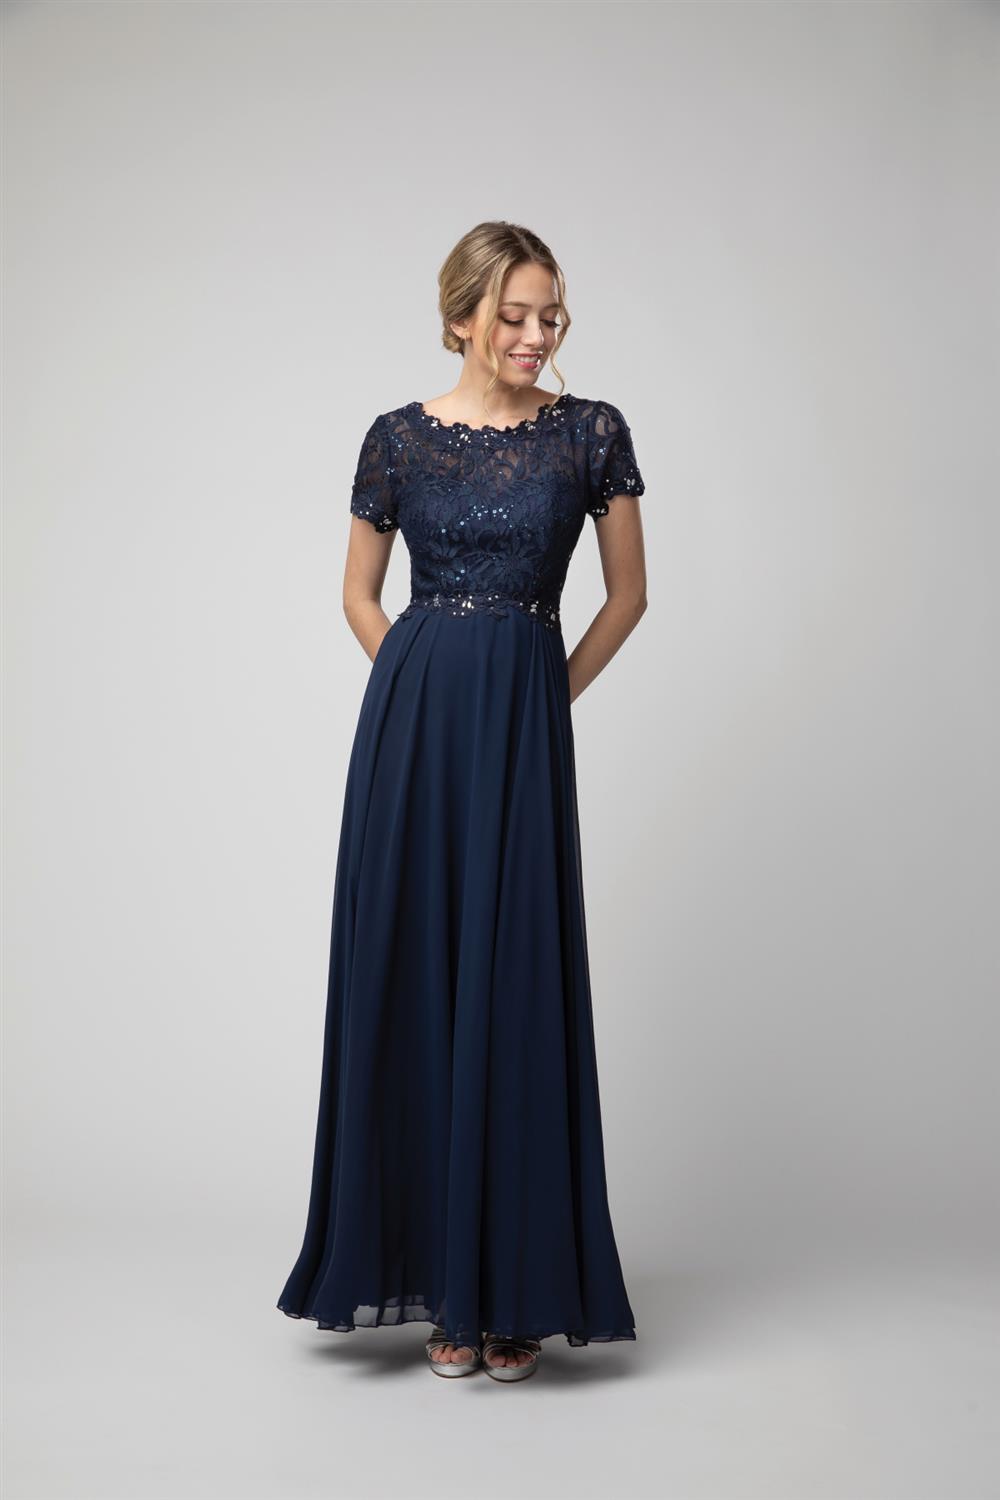 Short Sleeve Lace Bodice A-line Gown by Juno 1056